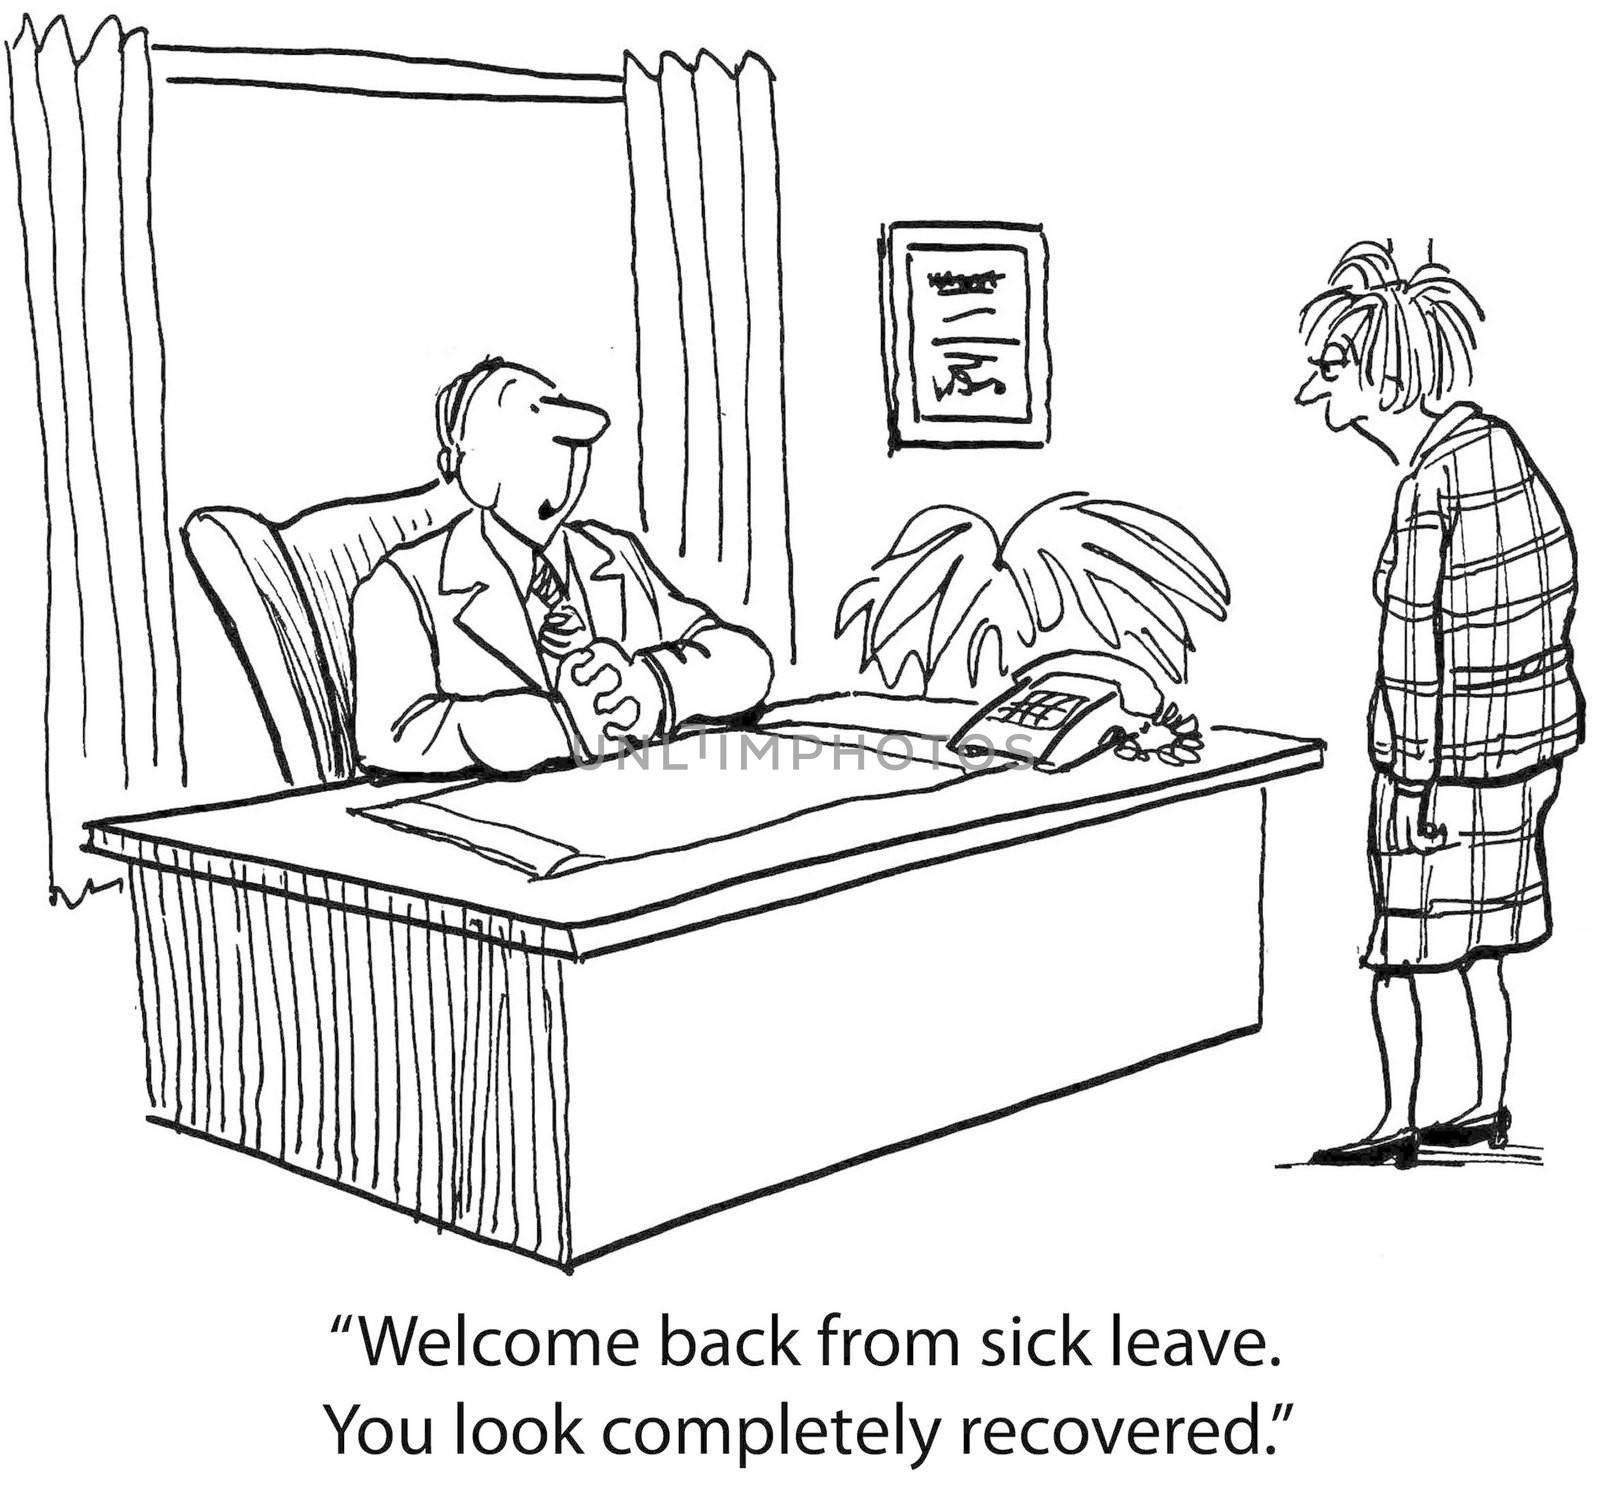 "Welcome back from sick leave. You look completely recovered."